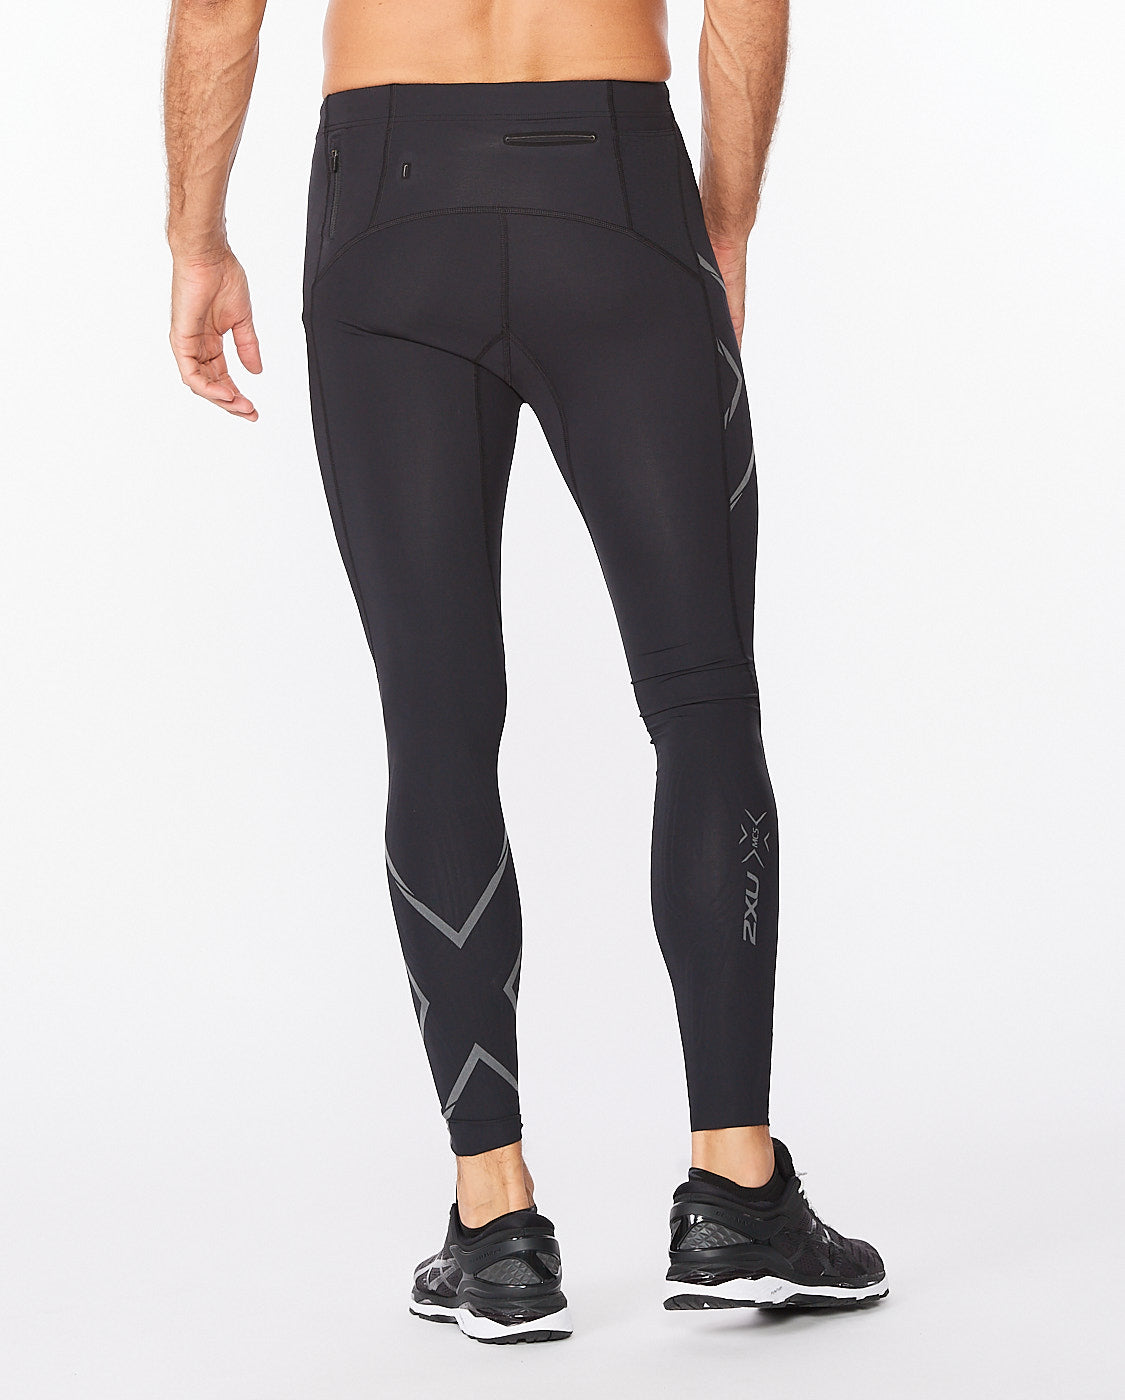 2XU Men's Light Speed Compression Tights - Lightweight & Flexible Support  for Improved Running Performance - Black/Gold